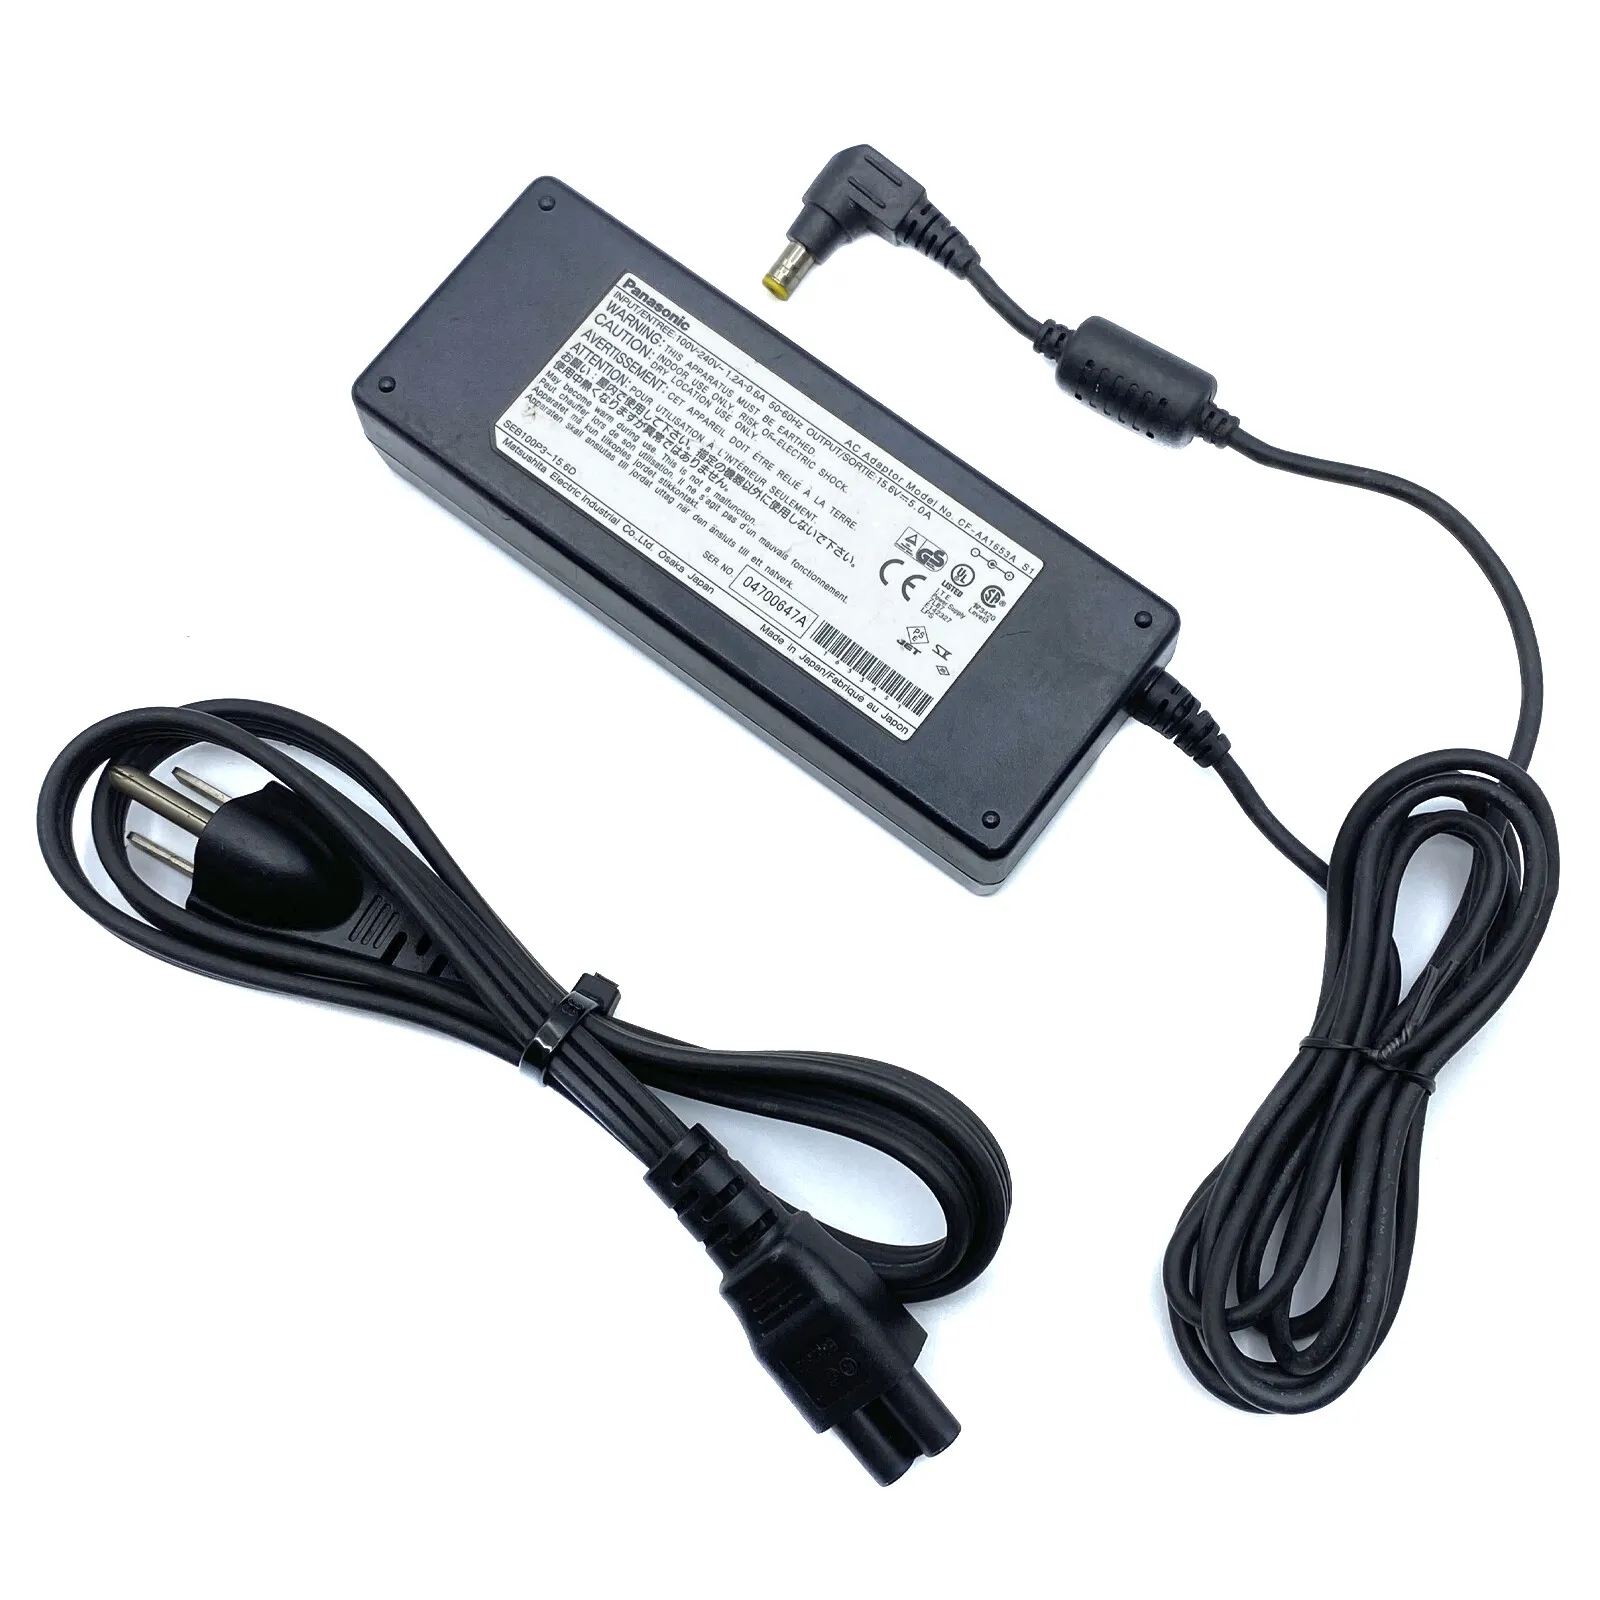 *Brand NEW*Genuine Panasonic CF-AA1653A S1 15.6V 5A 78W AC Adapter for Toughbook Laptop CF-19 CF-20